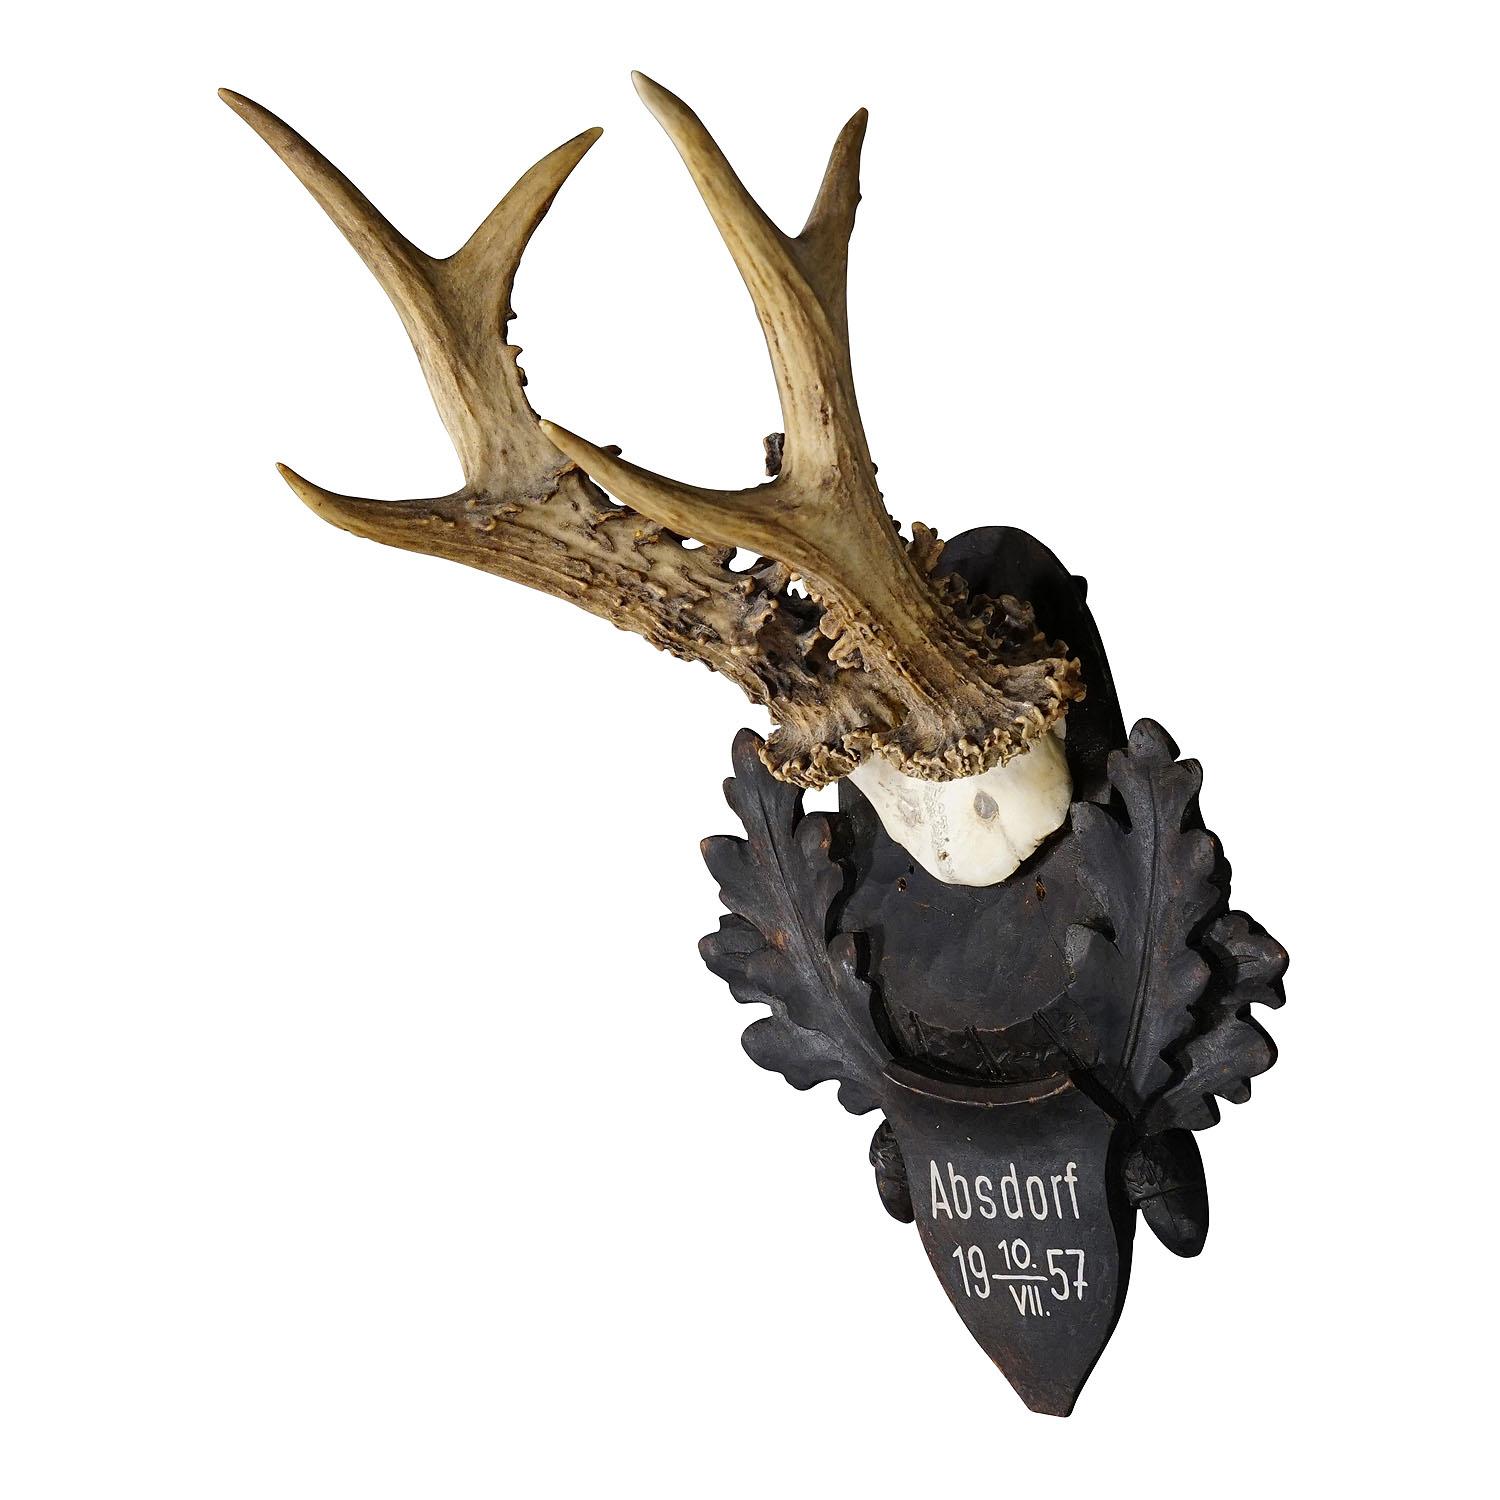 Large Black Forest Roe Deer Trophy on Carved Plaque 1957

A great vintage roe deer (Capreolus capreolus) trophy on a wooden carved plaque. The plaque features a handpainted inscription stating place and date of the hunt. The trophy was shot in 1957.